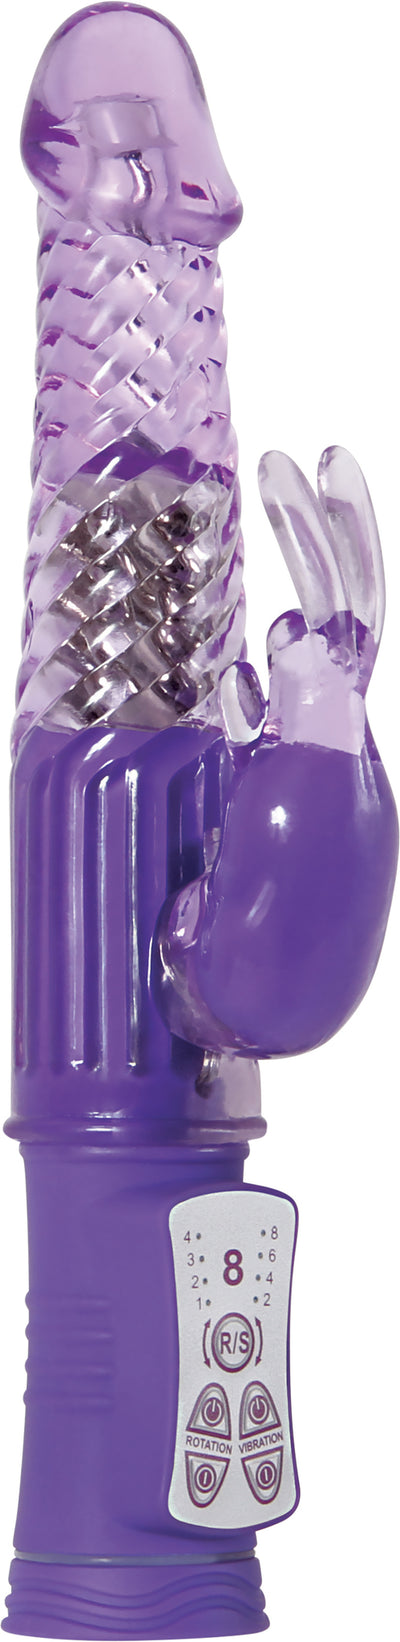 Eve's First Rechargeable Rabbit  from thedildohub.com